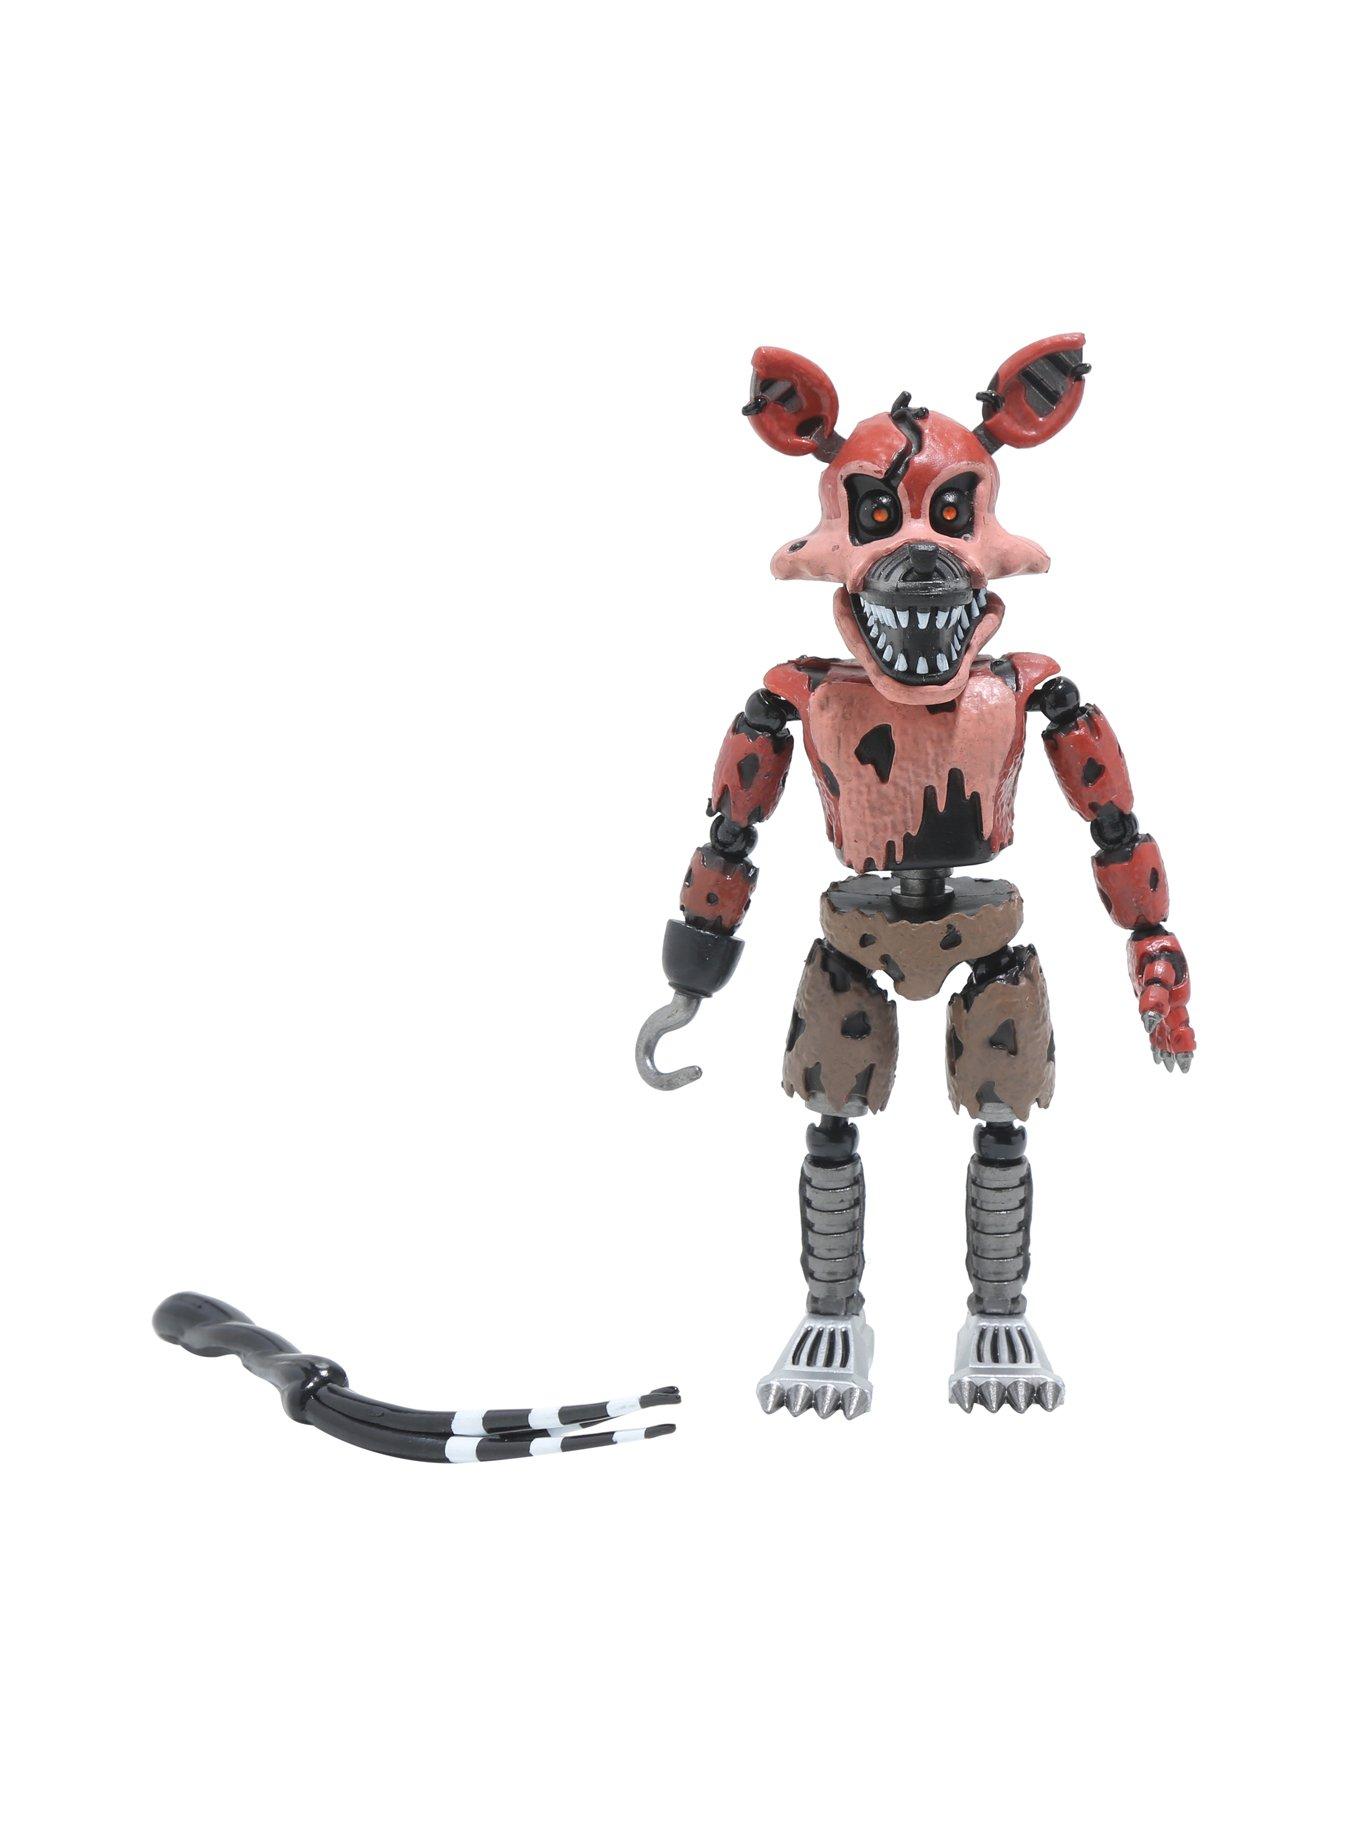  Funko Five Nights at Freddy's Articulated Foxy Action